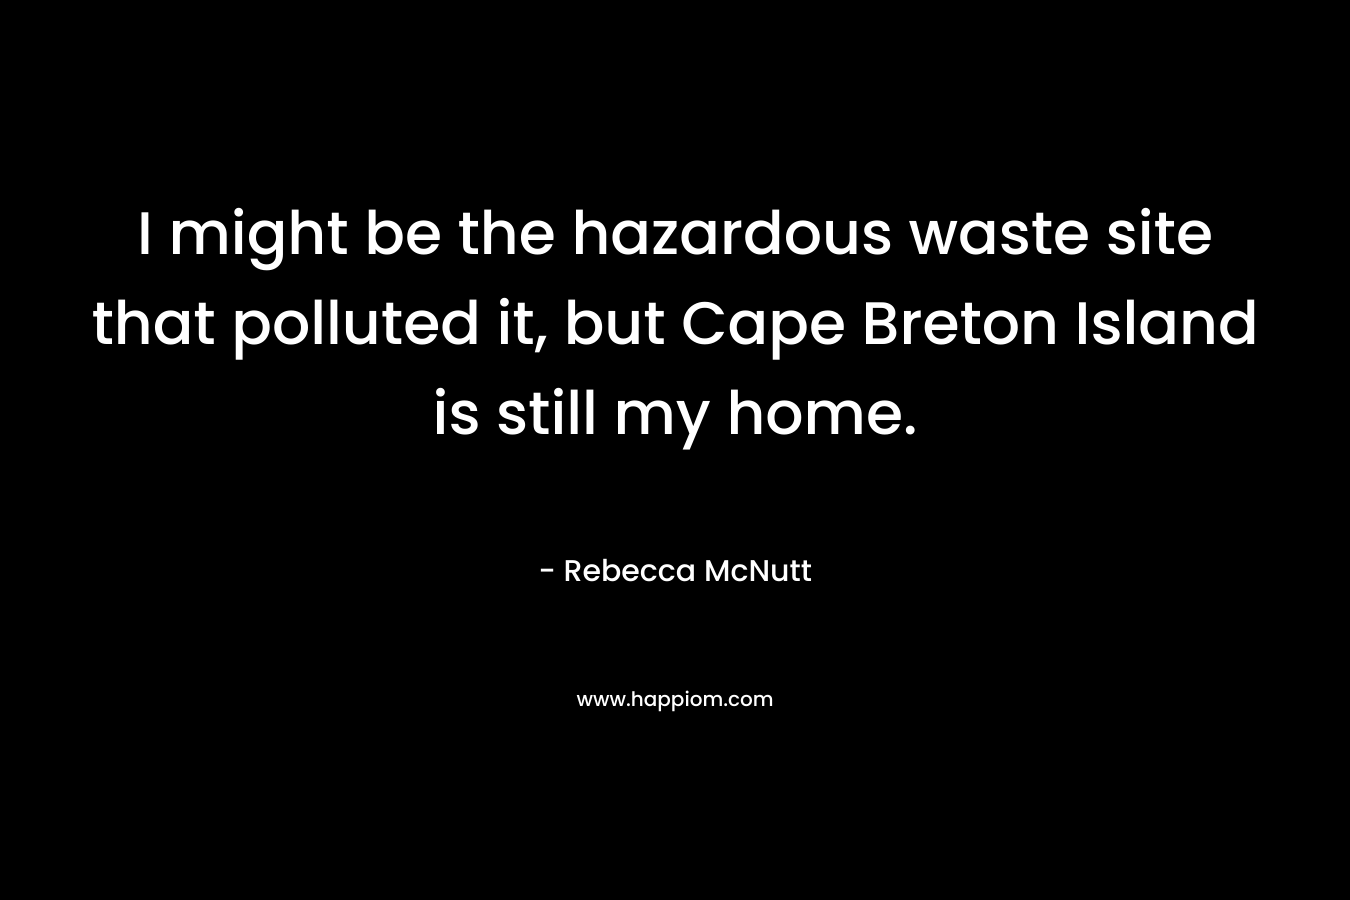 I might be the hazardous waste site that polluted it, but Cape Breton Island is still my home. – Rebecca McNutt